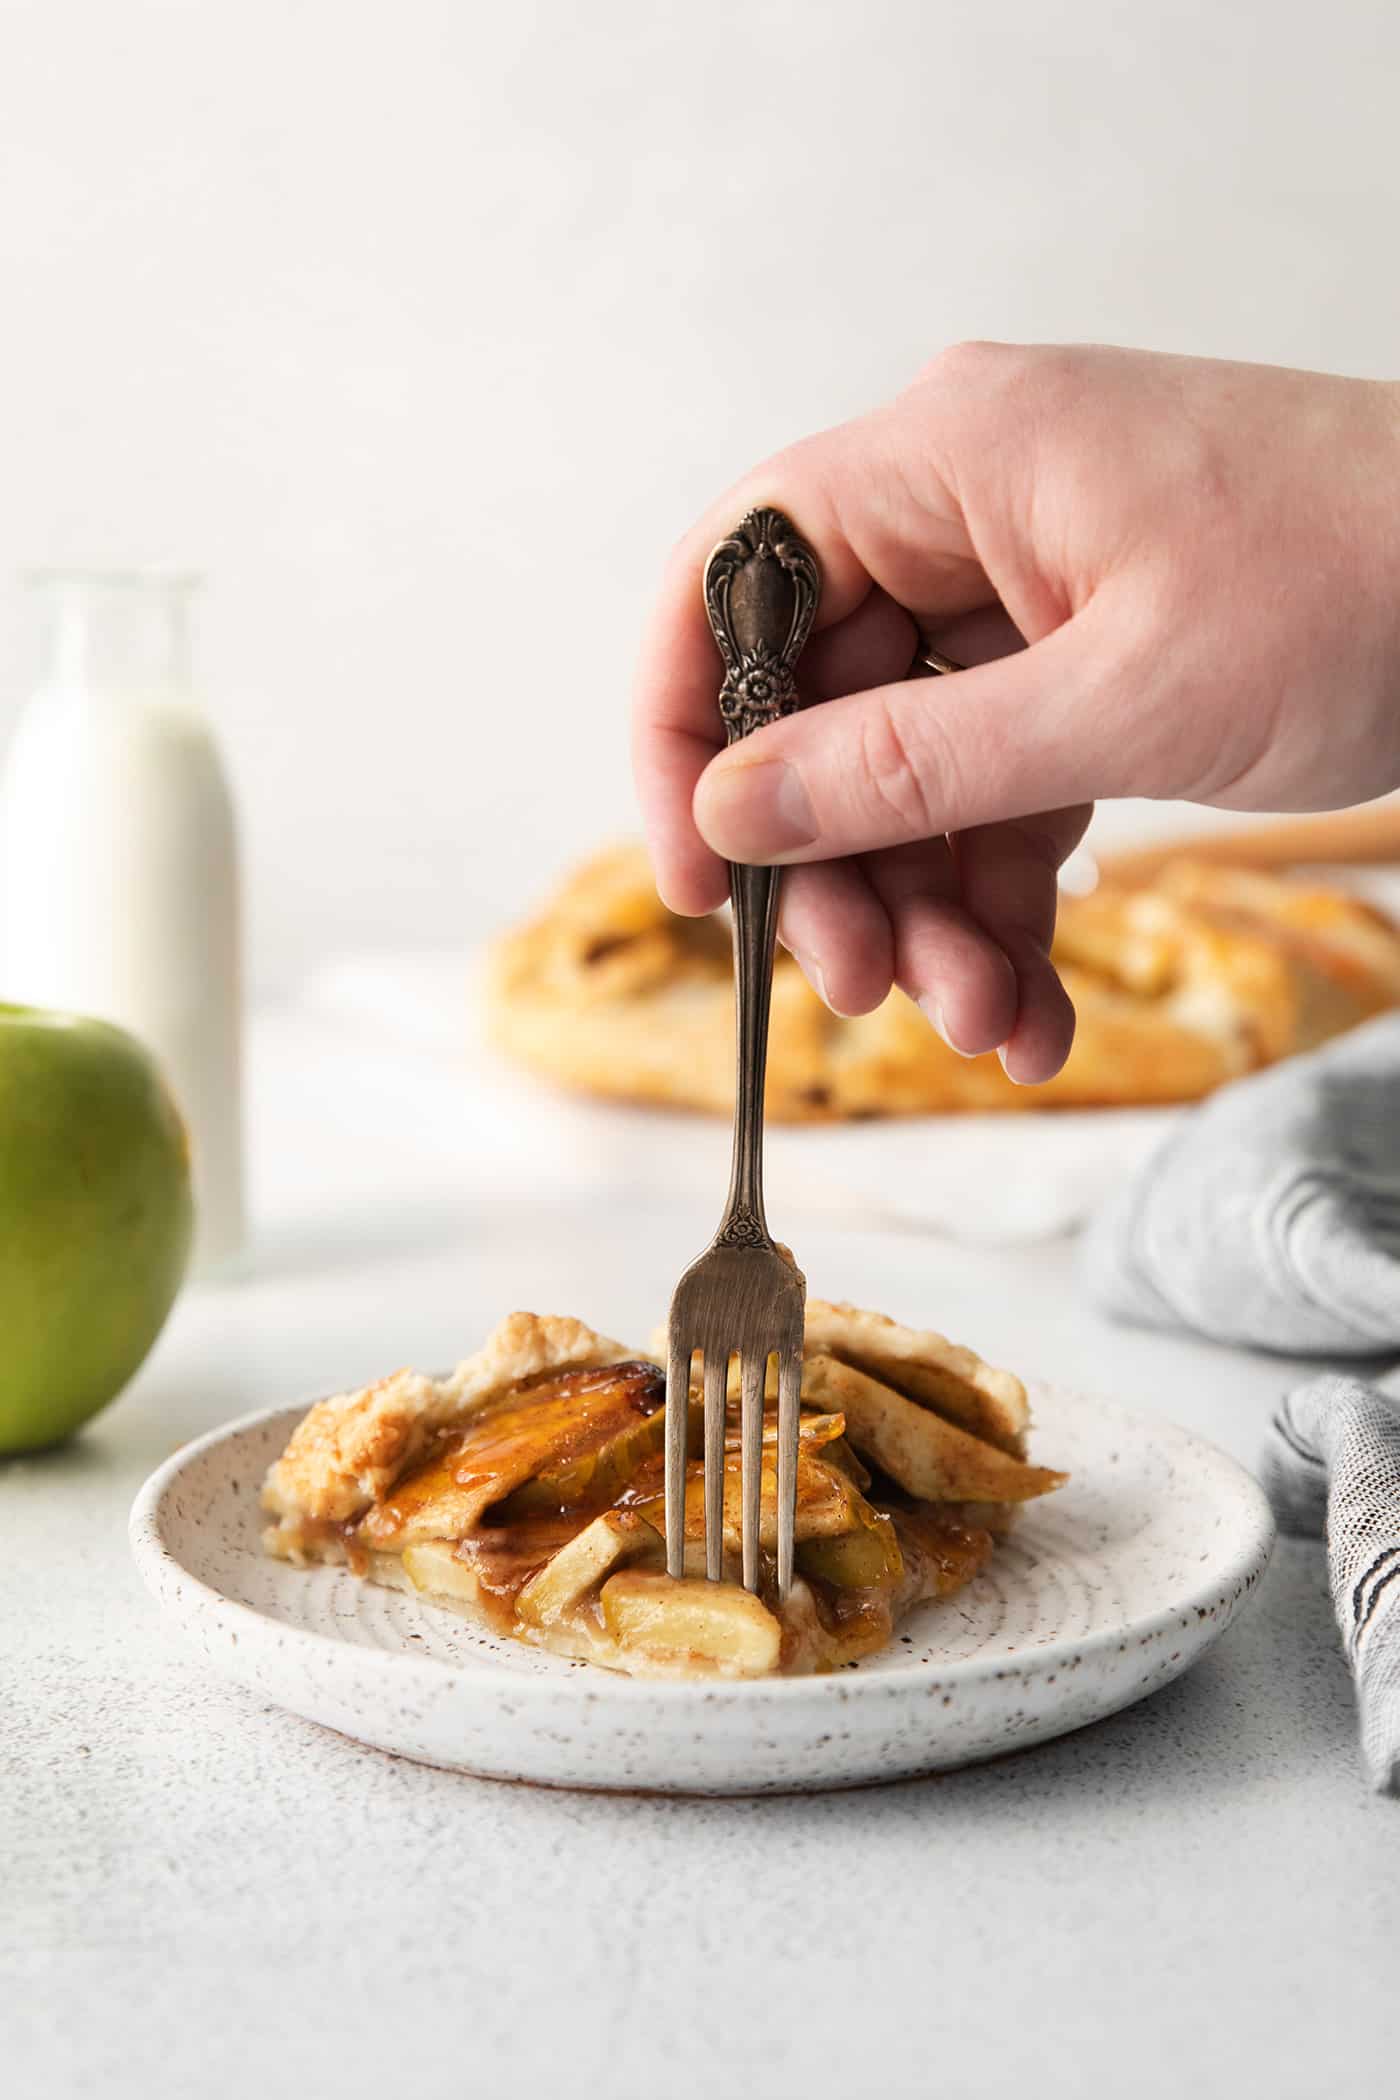 A fork taking a bite of an apple almond galette